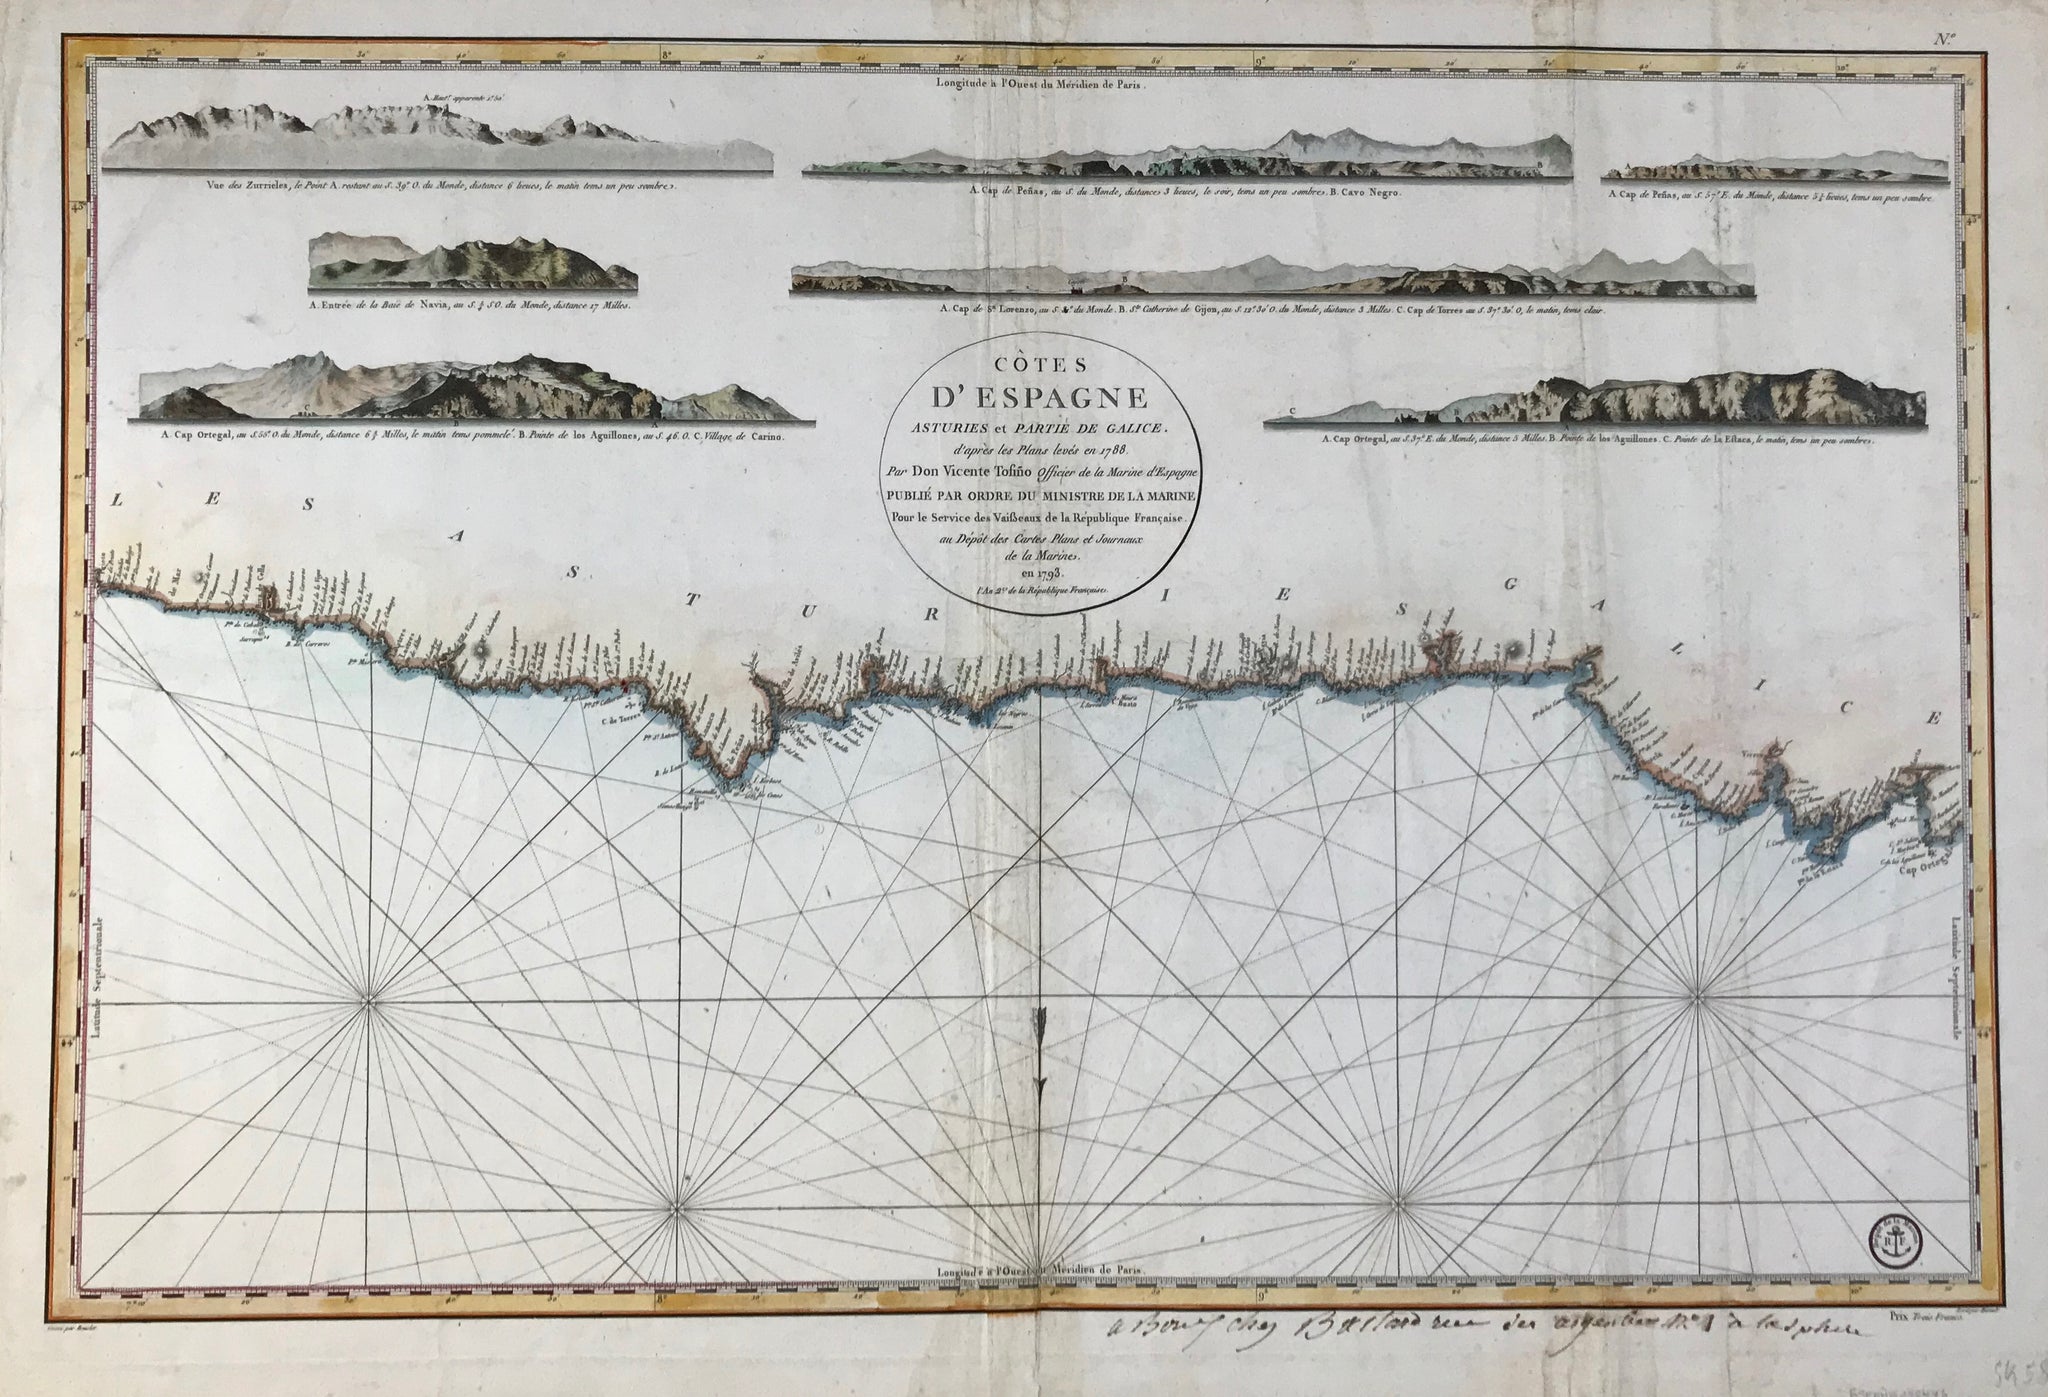 Hand-colored copper etching by Bouclet. Published on behalf of the French Ministry of the Marine. Paris, 1793  Map reaches from Cabo Prieto in the east to Cabo Ortegal, the northernmost landmark of Spain. There are 7 coastal elevation profiles shown.